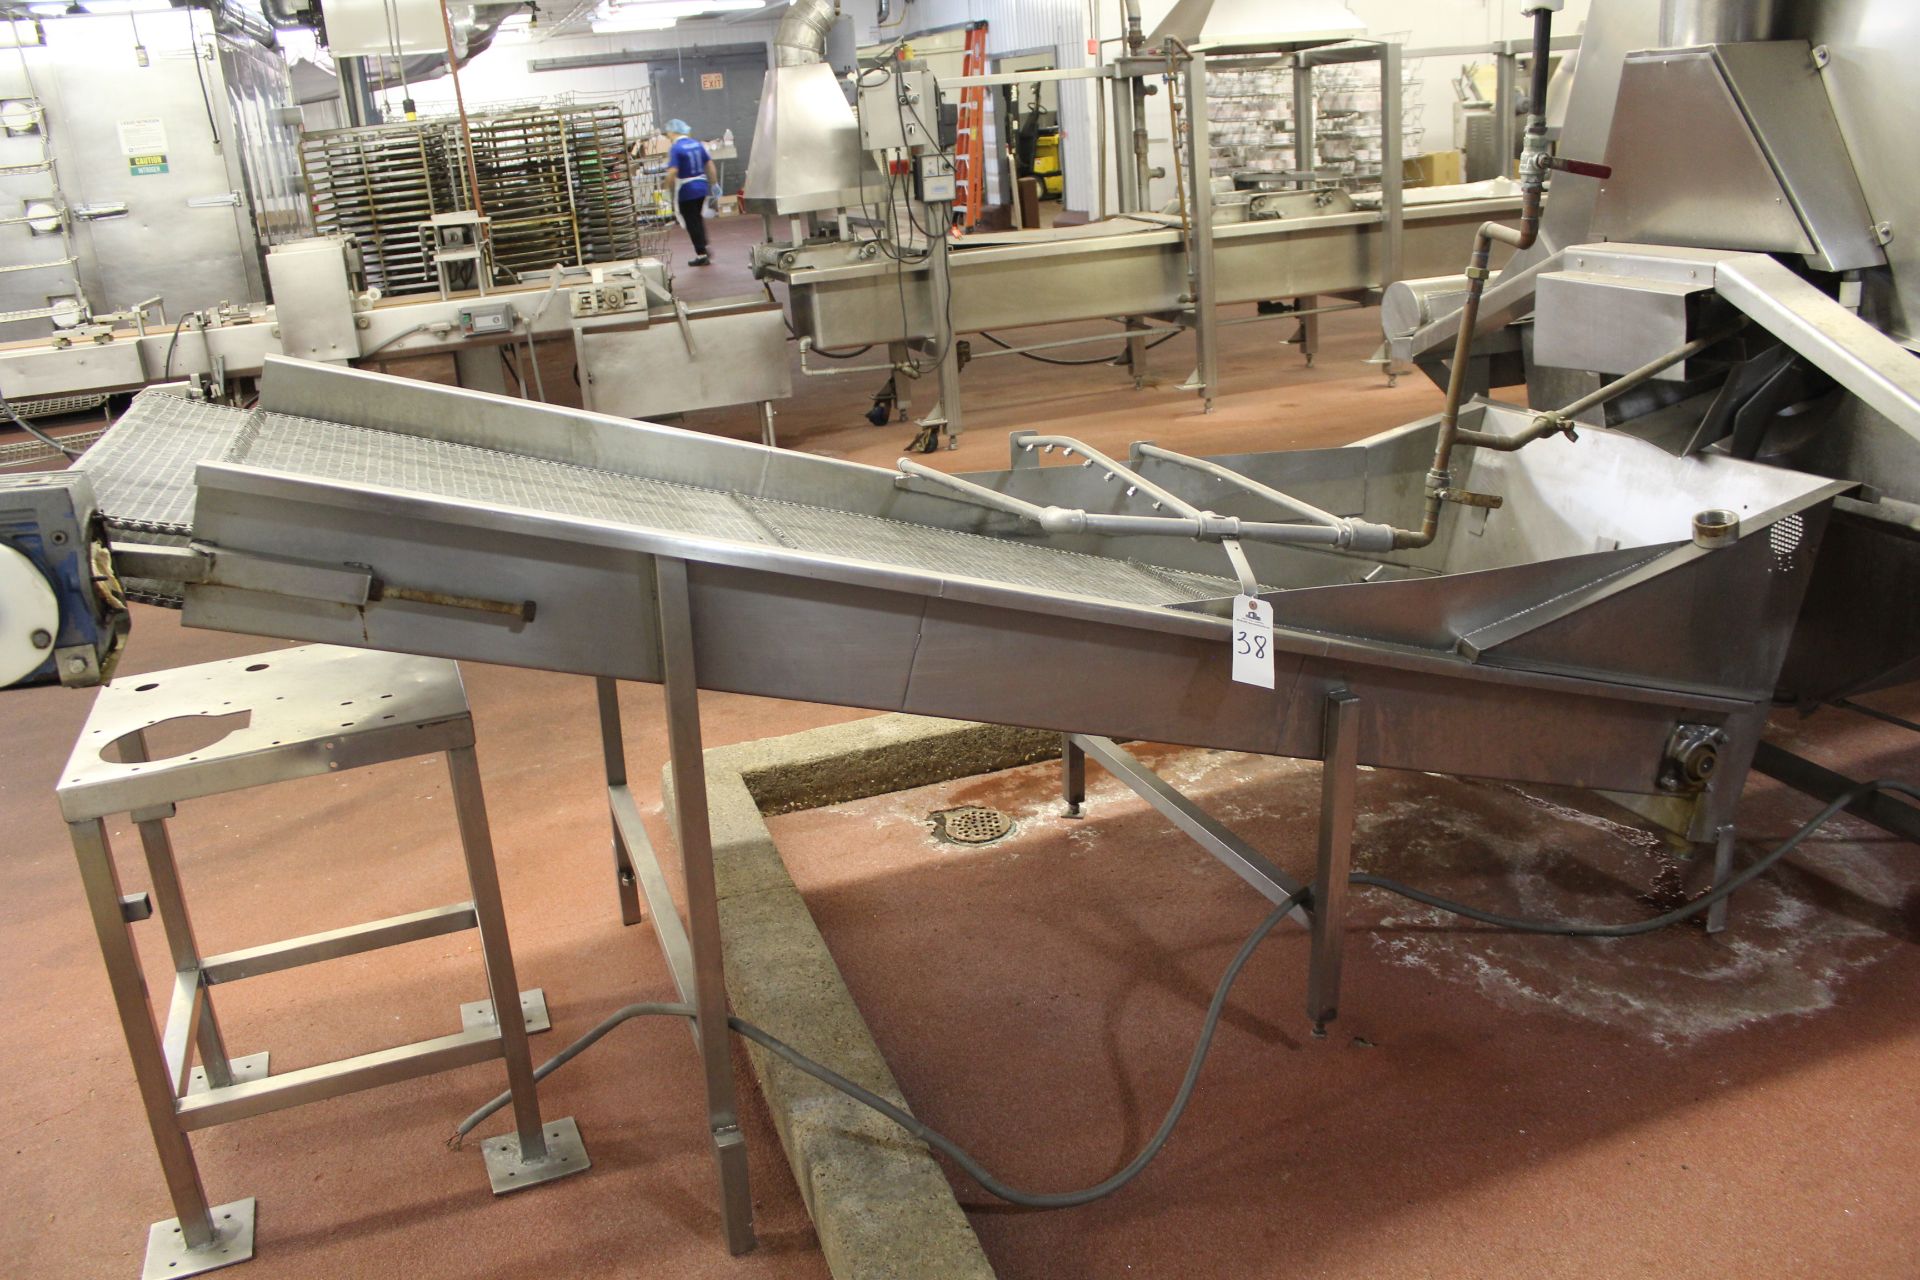 Stainless Steel Mesh Drip Conveyor Section, 36" X 8' | Rigging Price: $300